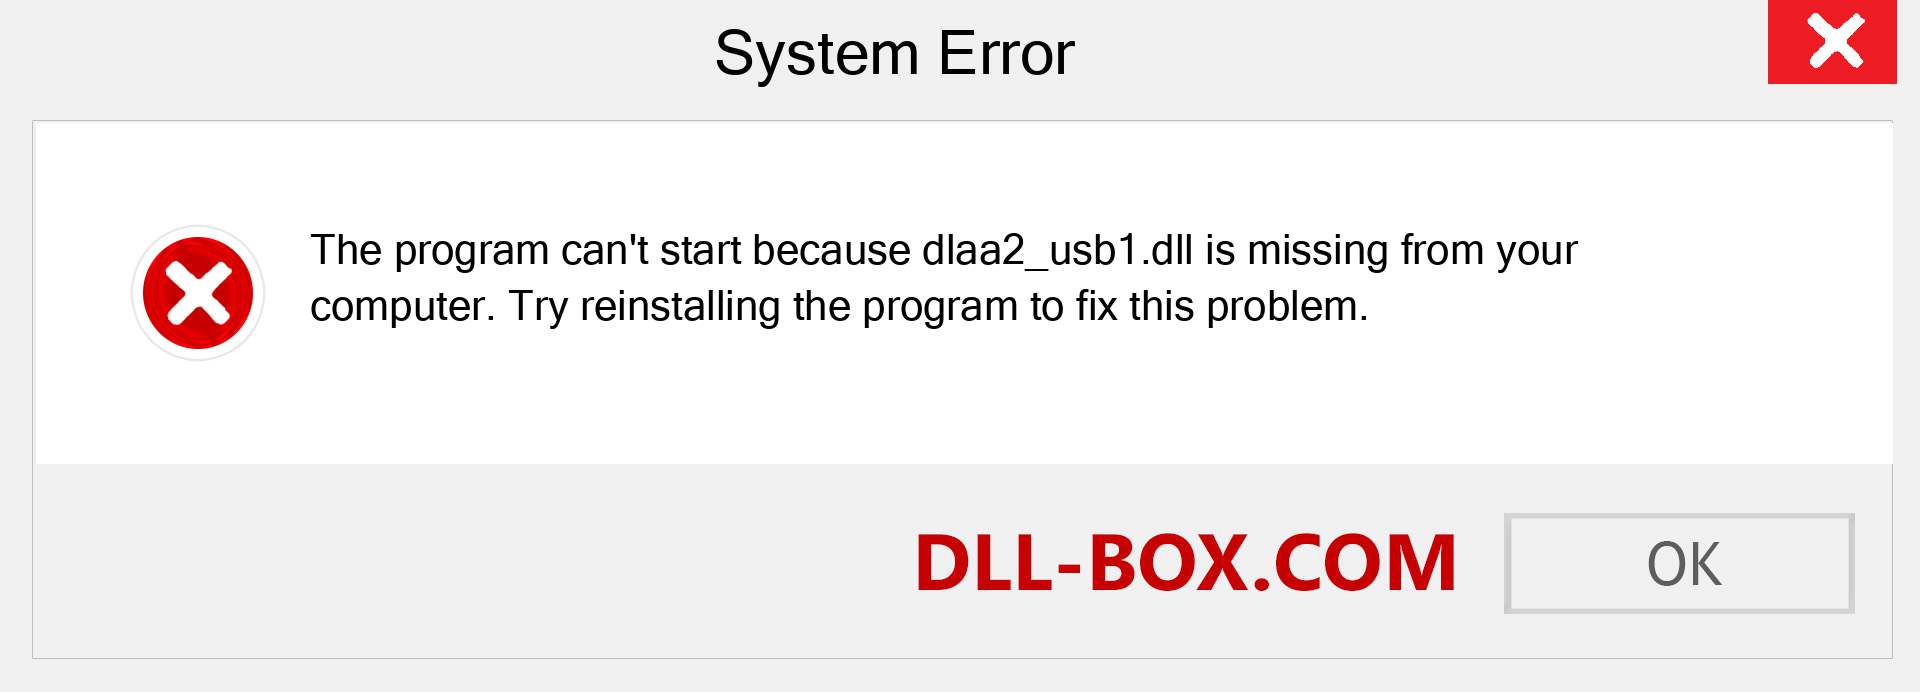  dlaa2_usb1.dll file is missing?. Download for Windows 7, 8, 10 - Fix  dlaa2_usb1 dll Missing Error on Windows, photos, images